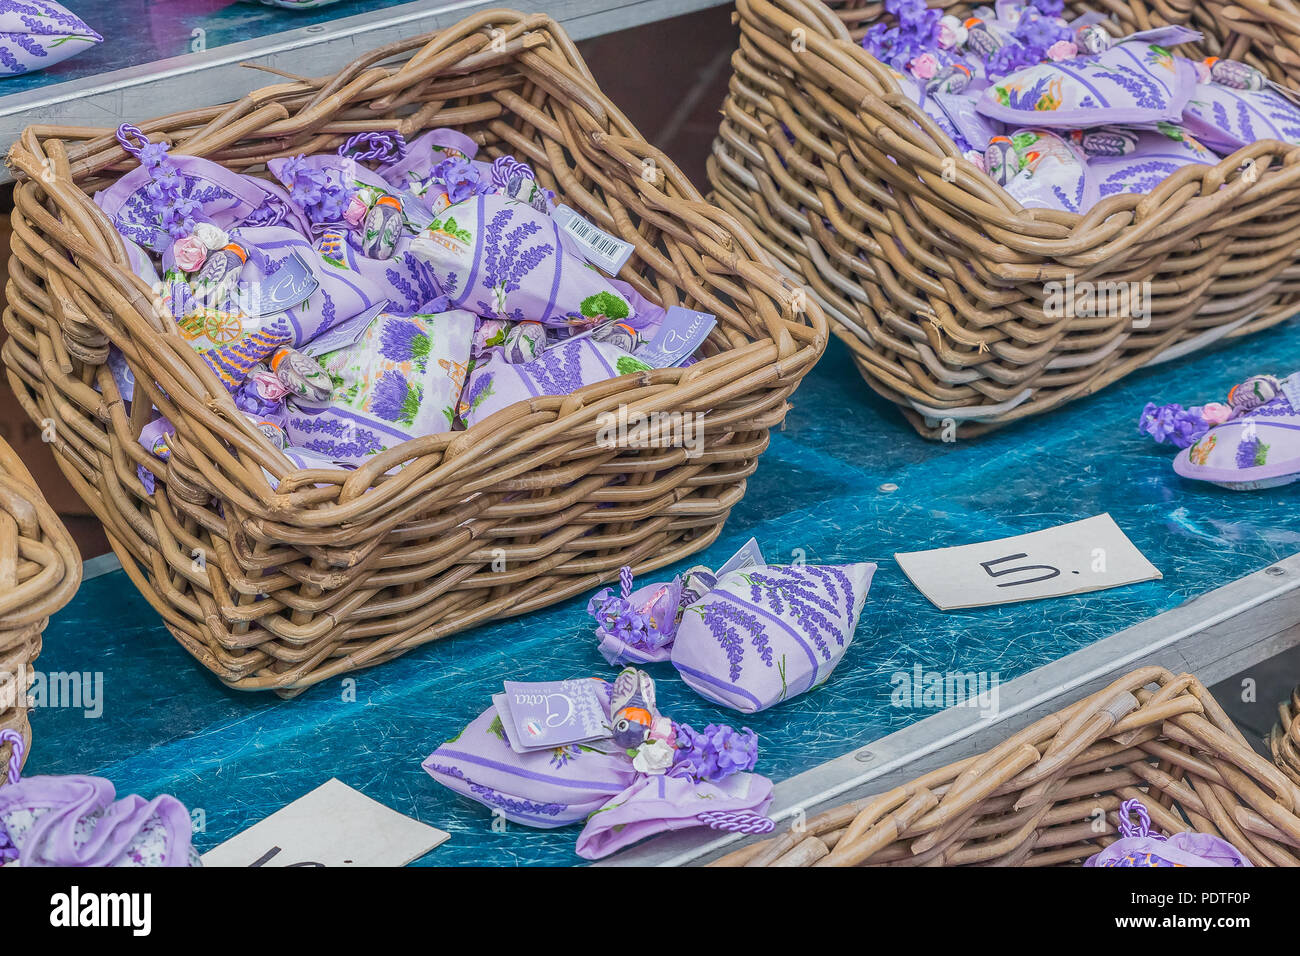 Colorful decorative sachets filled with lavender at market at a market in Nice in the South of France Stock Photo